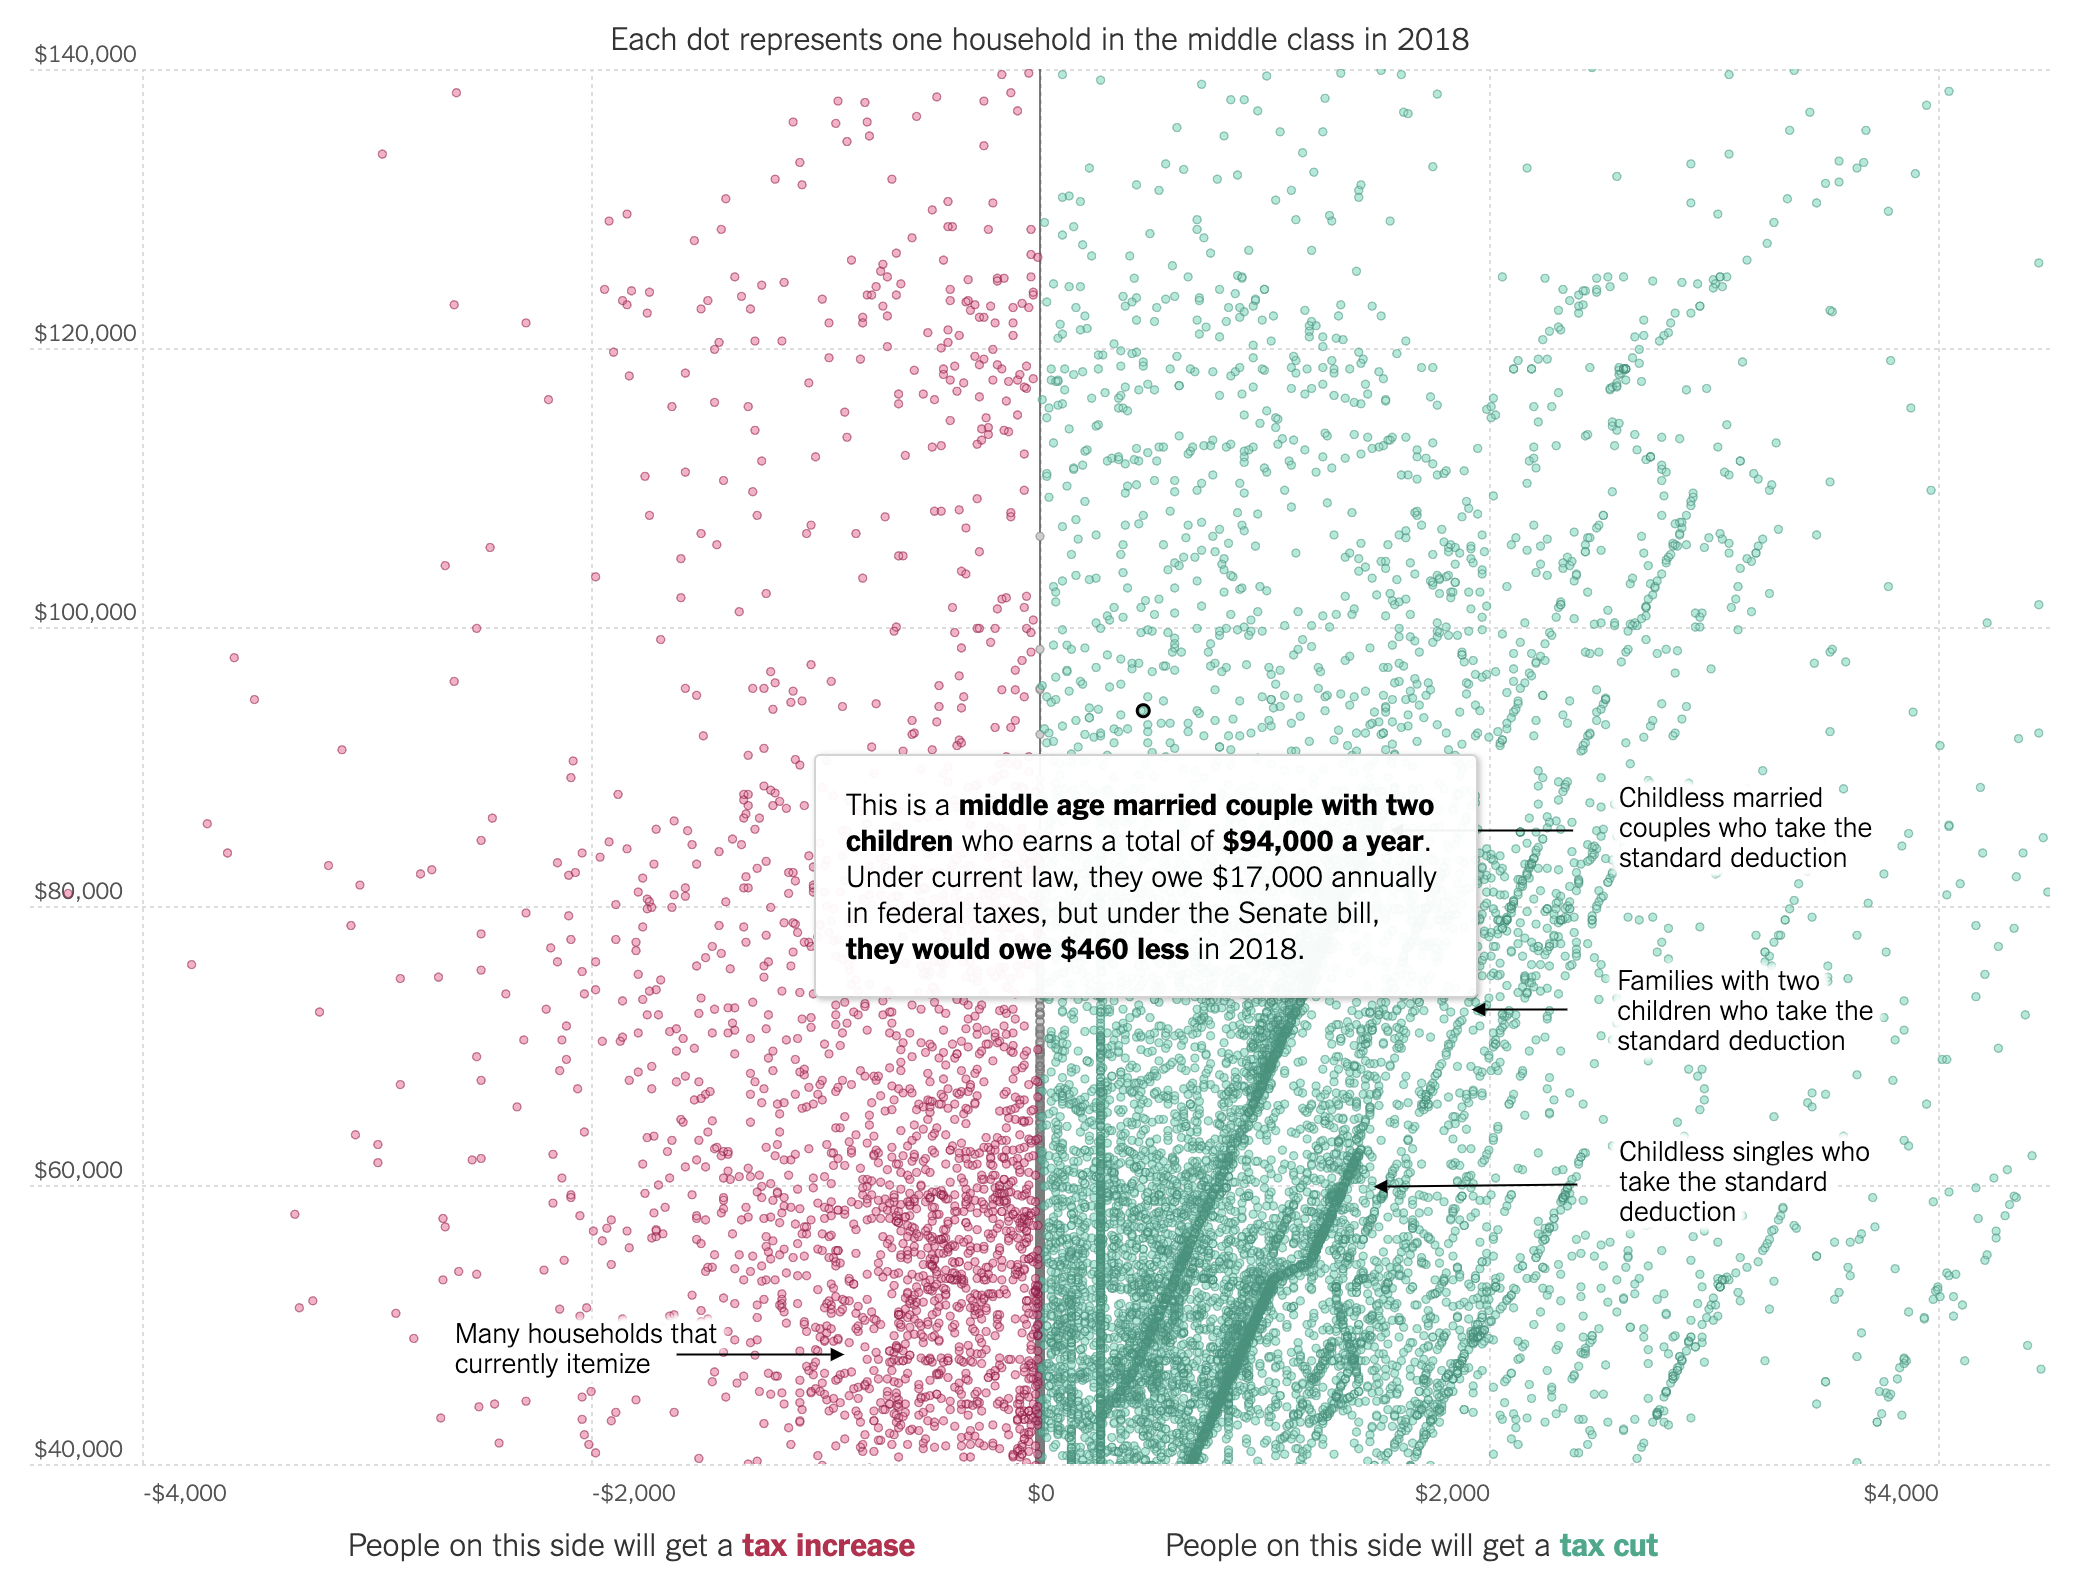 A scatter plot showing family income on the y axis, and the net impact of new tax rules on family income on th x axis. Text annotations explain some patterns visible in the data